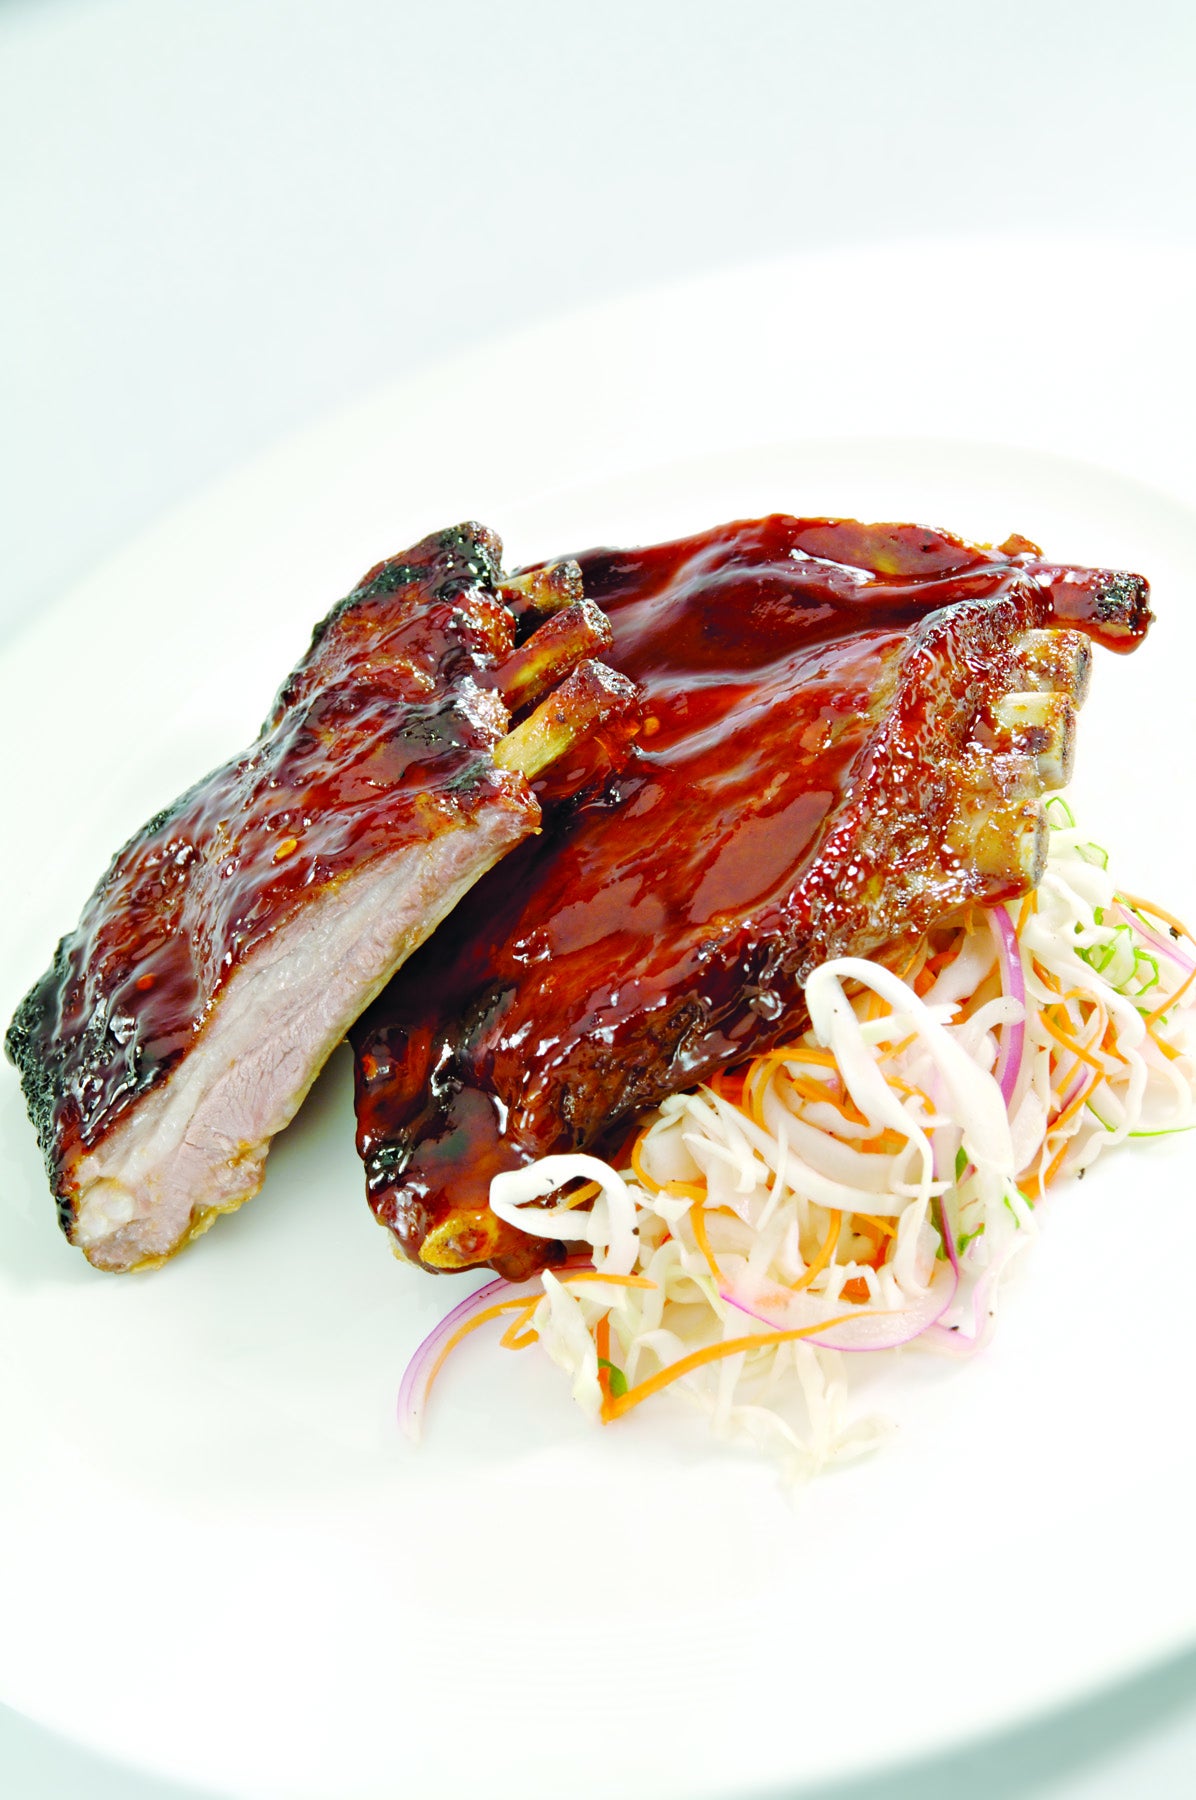 “Cooked Two Ways” Barbecued American Lamb Ribs